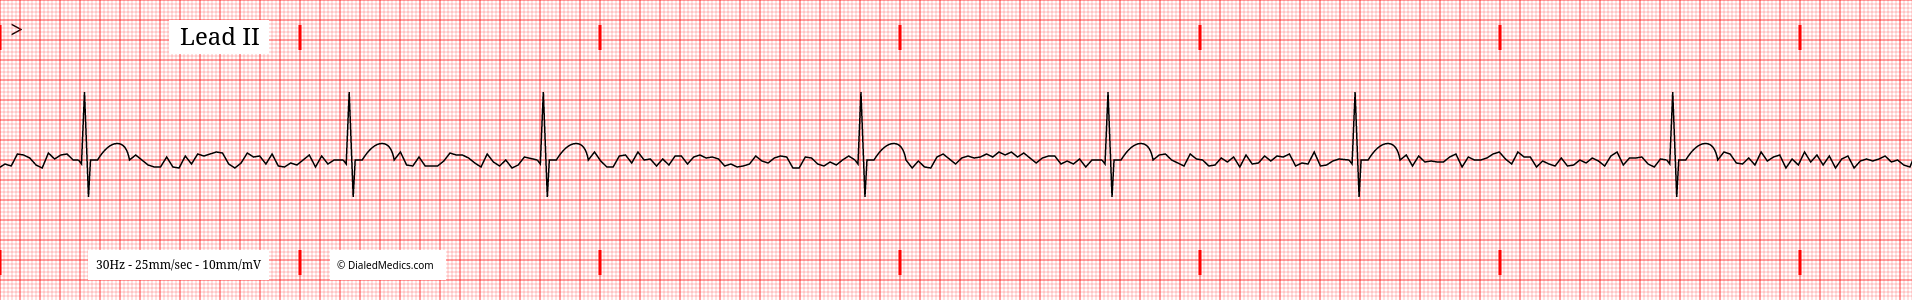 AFib with a Slow Ventricular Response EKG tracing.